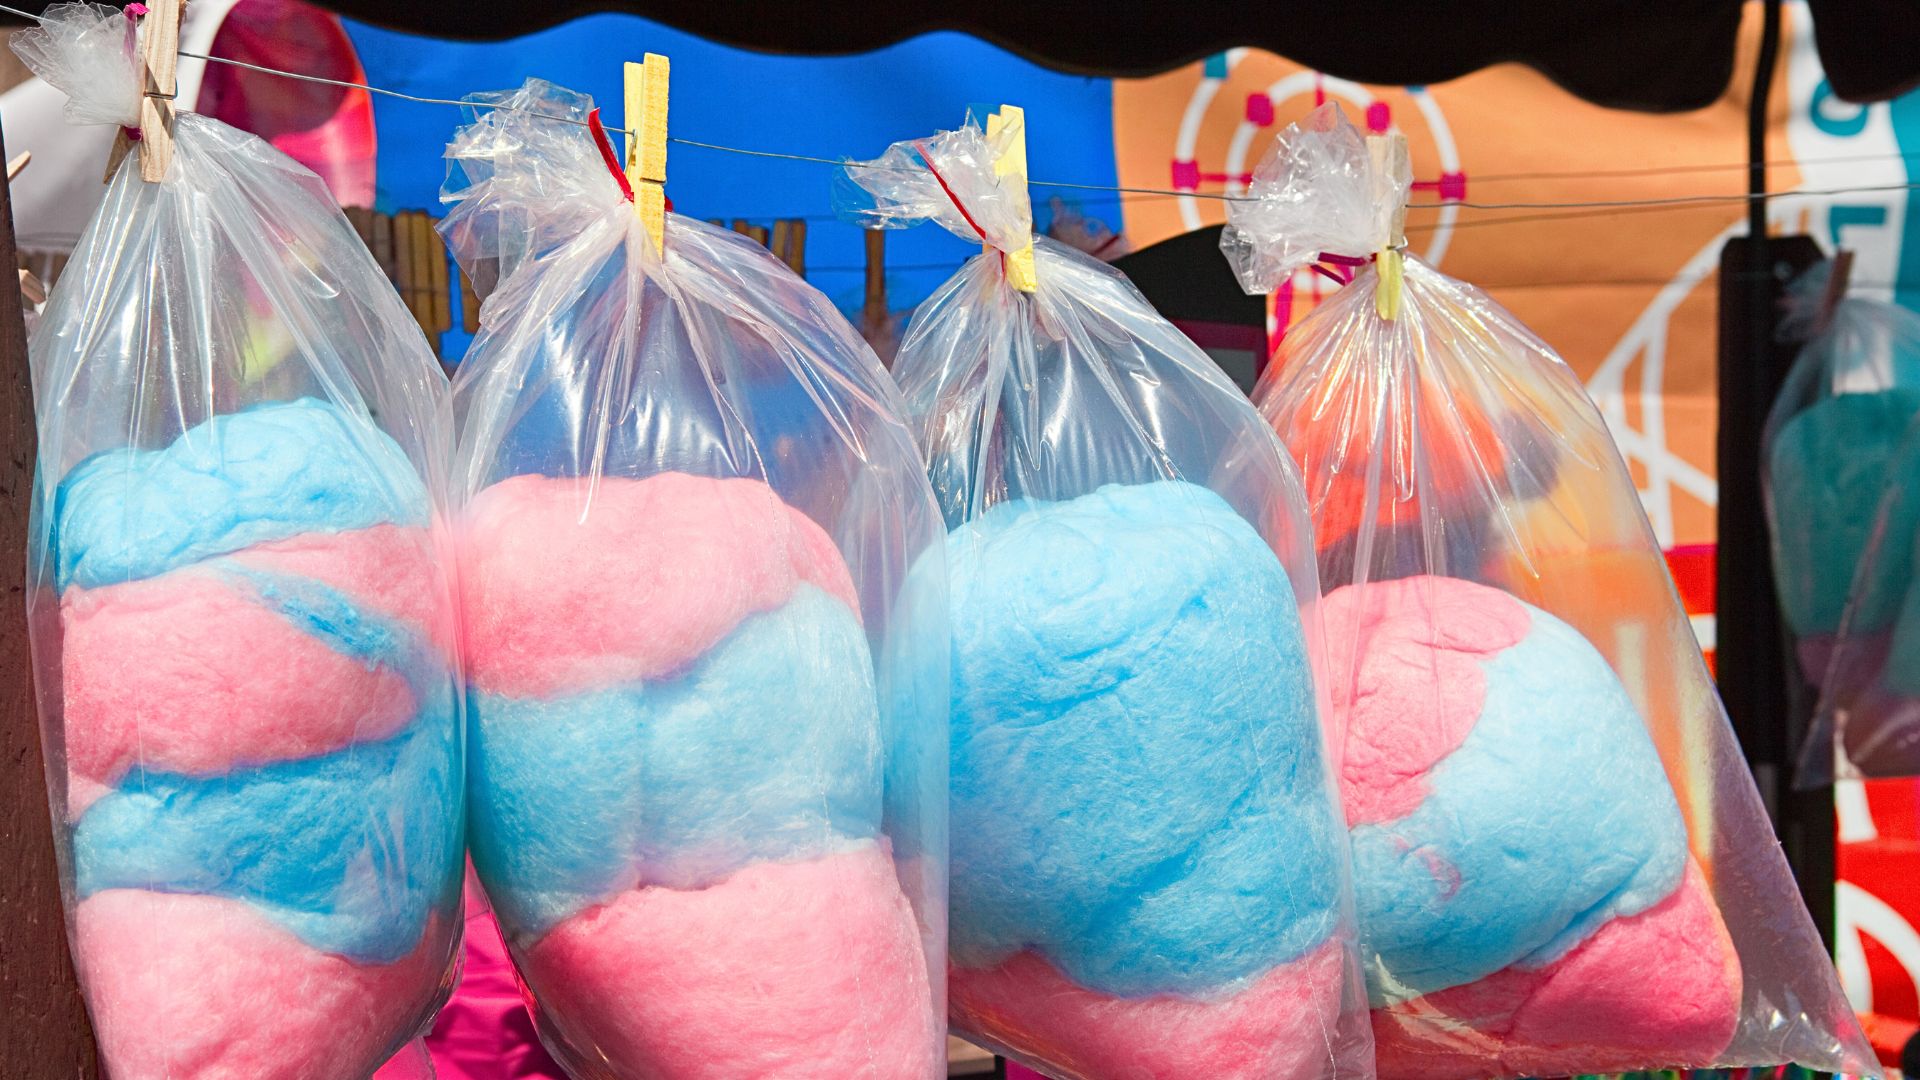 Tamil Nadu implements ban on Cotton Candy sales due to toxic dye